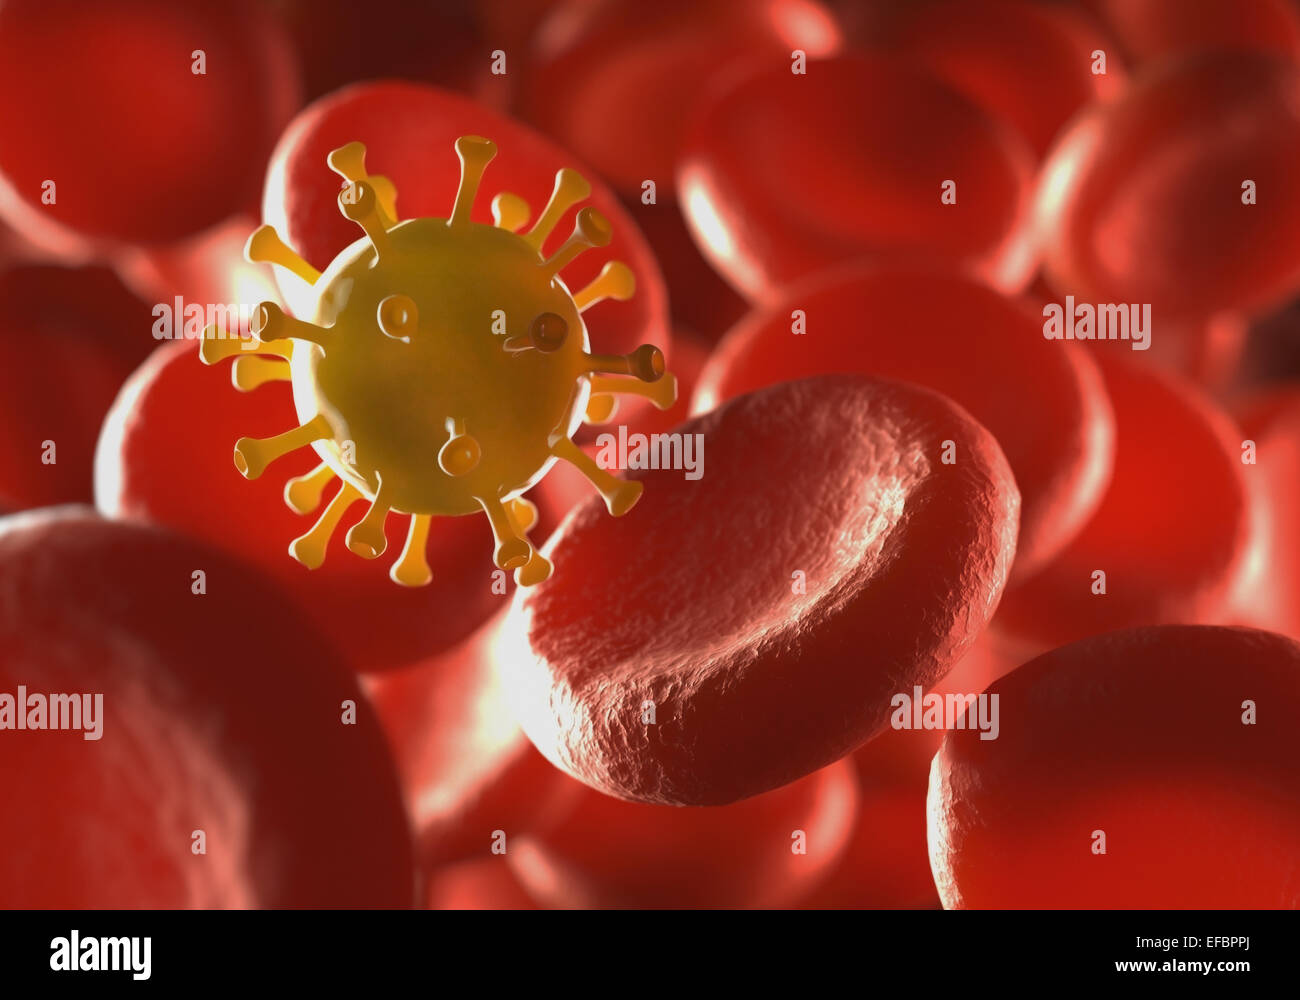 Red blood cells being attacked by virus with depth of field. Stock Photo